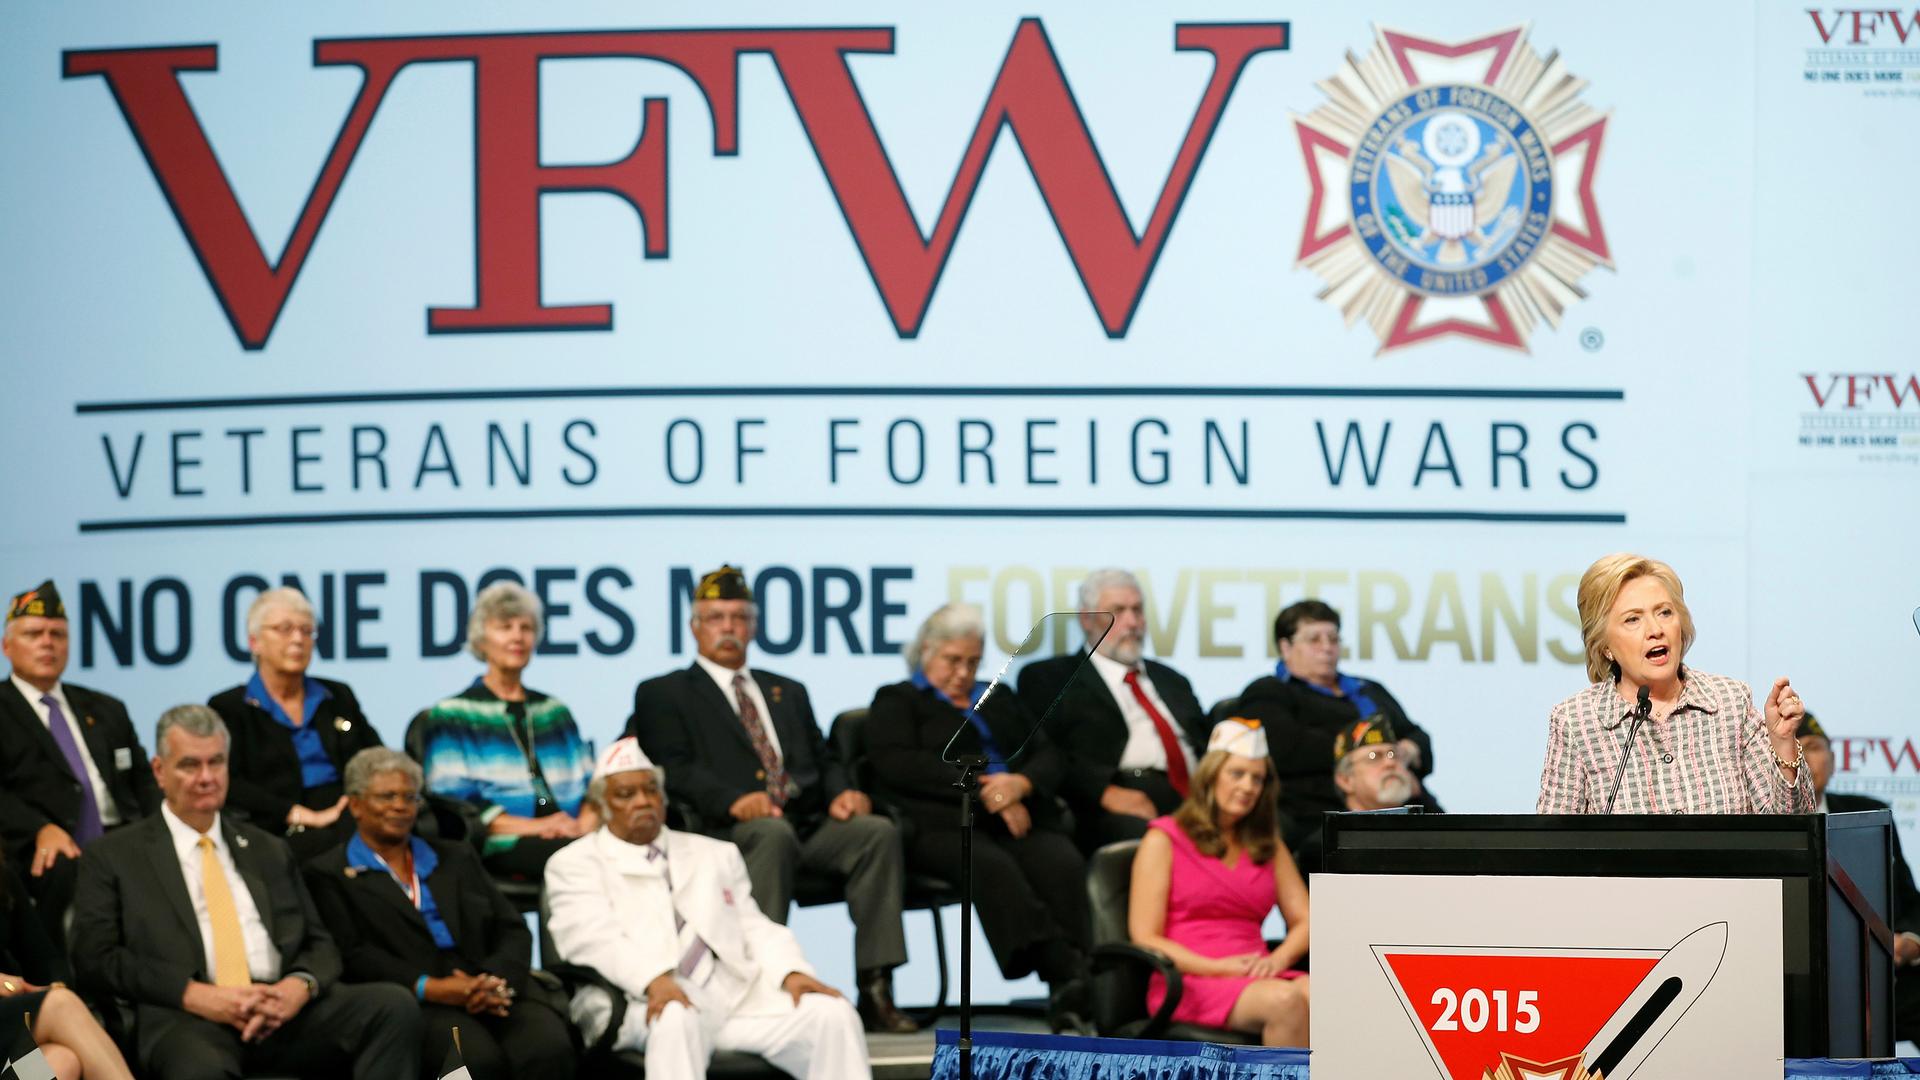 Hillary Clinton speaks at the Veterans of Foreign Wars Convention in Charlotte, NC. July 25, 2016.